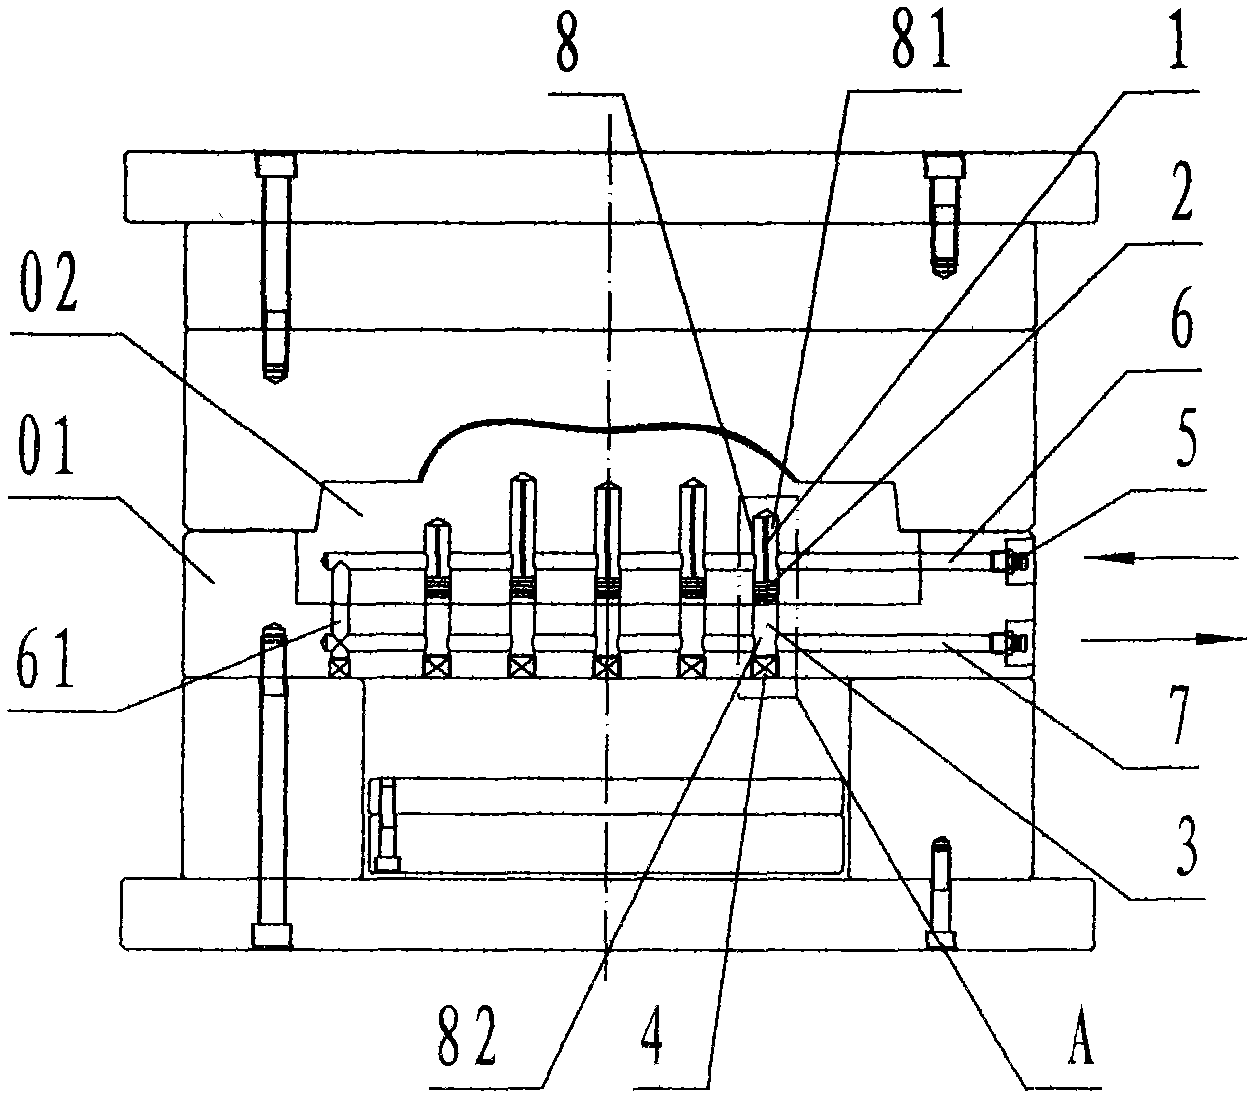 Circuit device of injection mold with single-side inlet and outlet cooling water